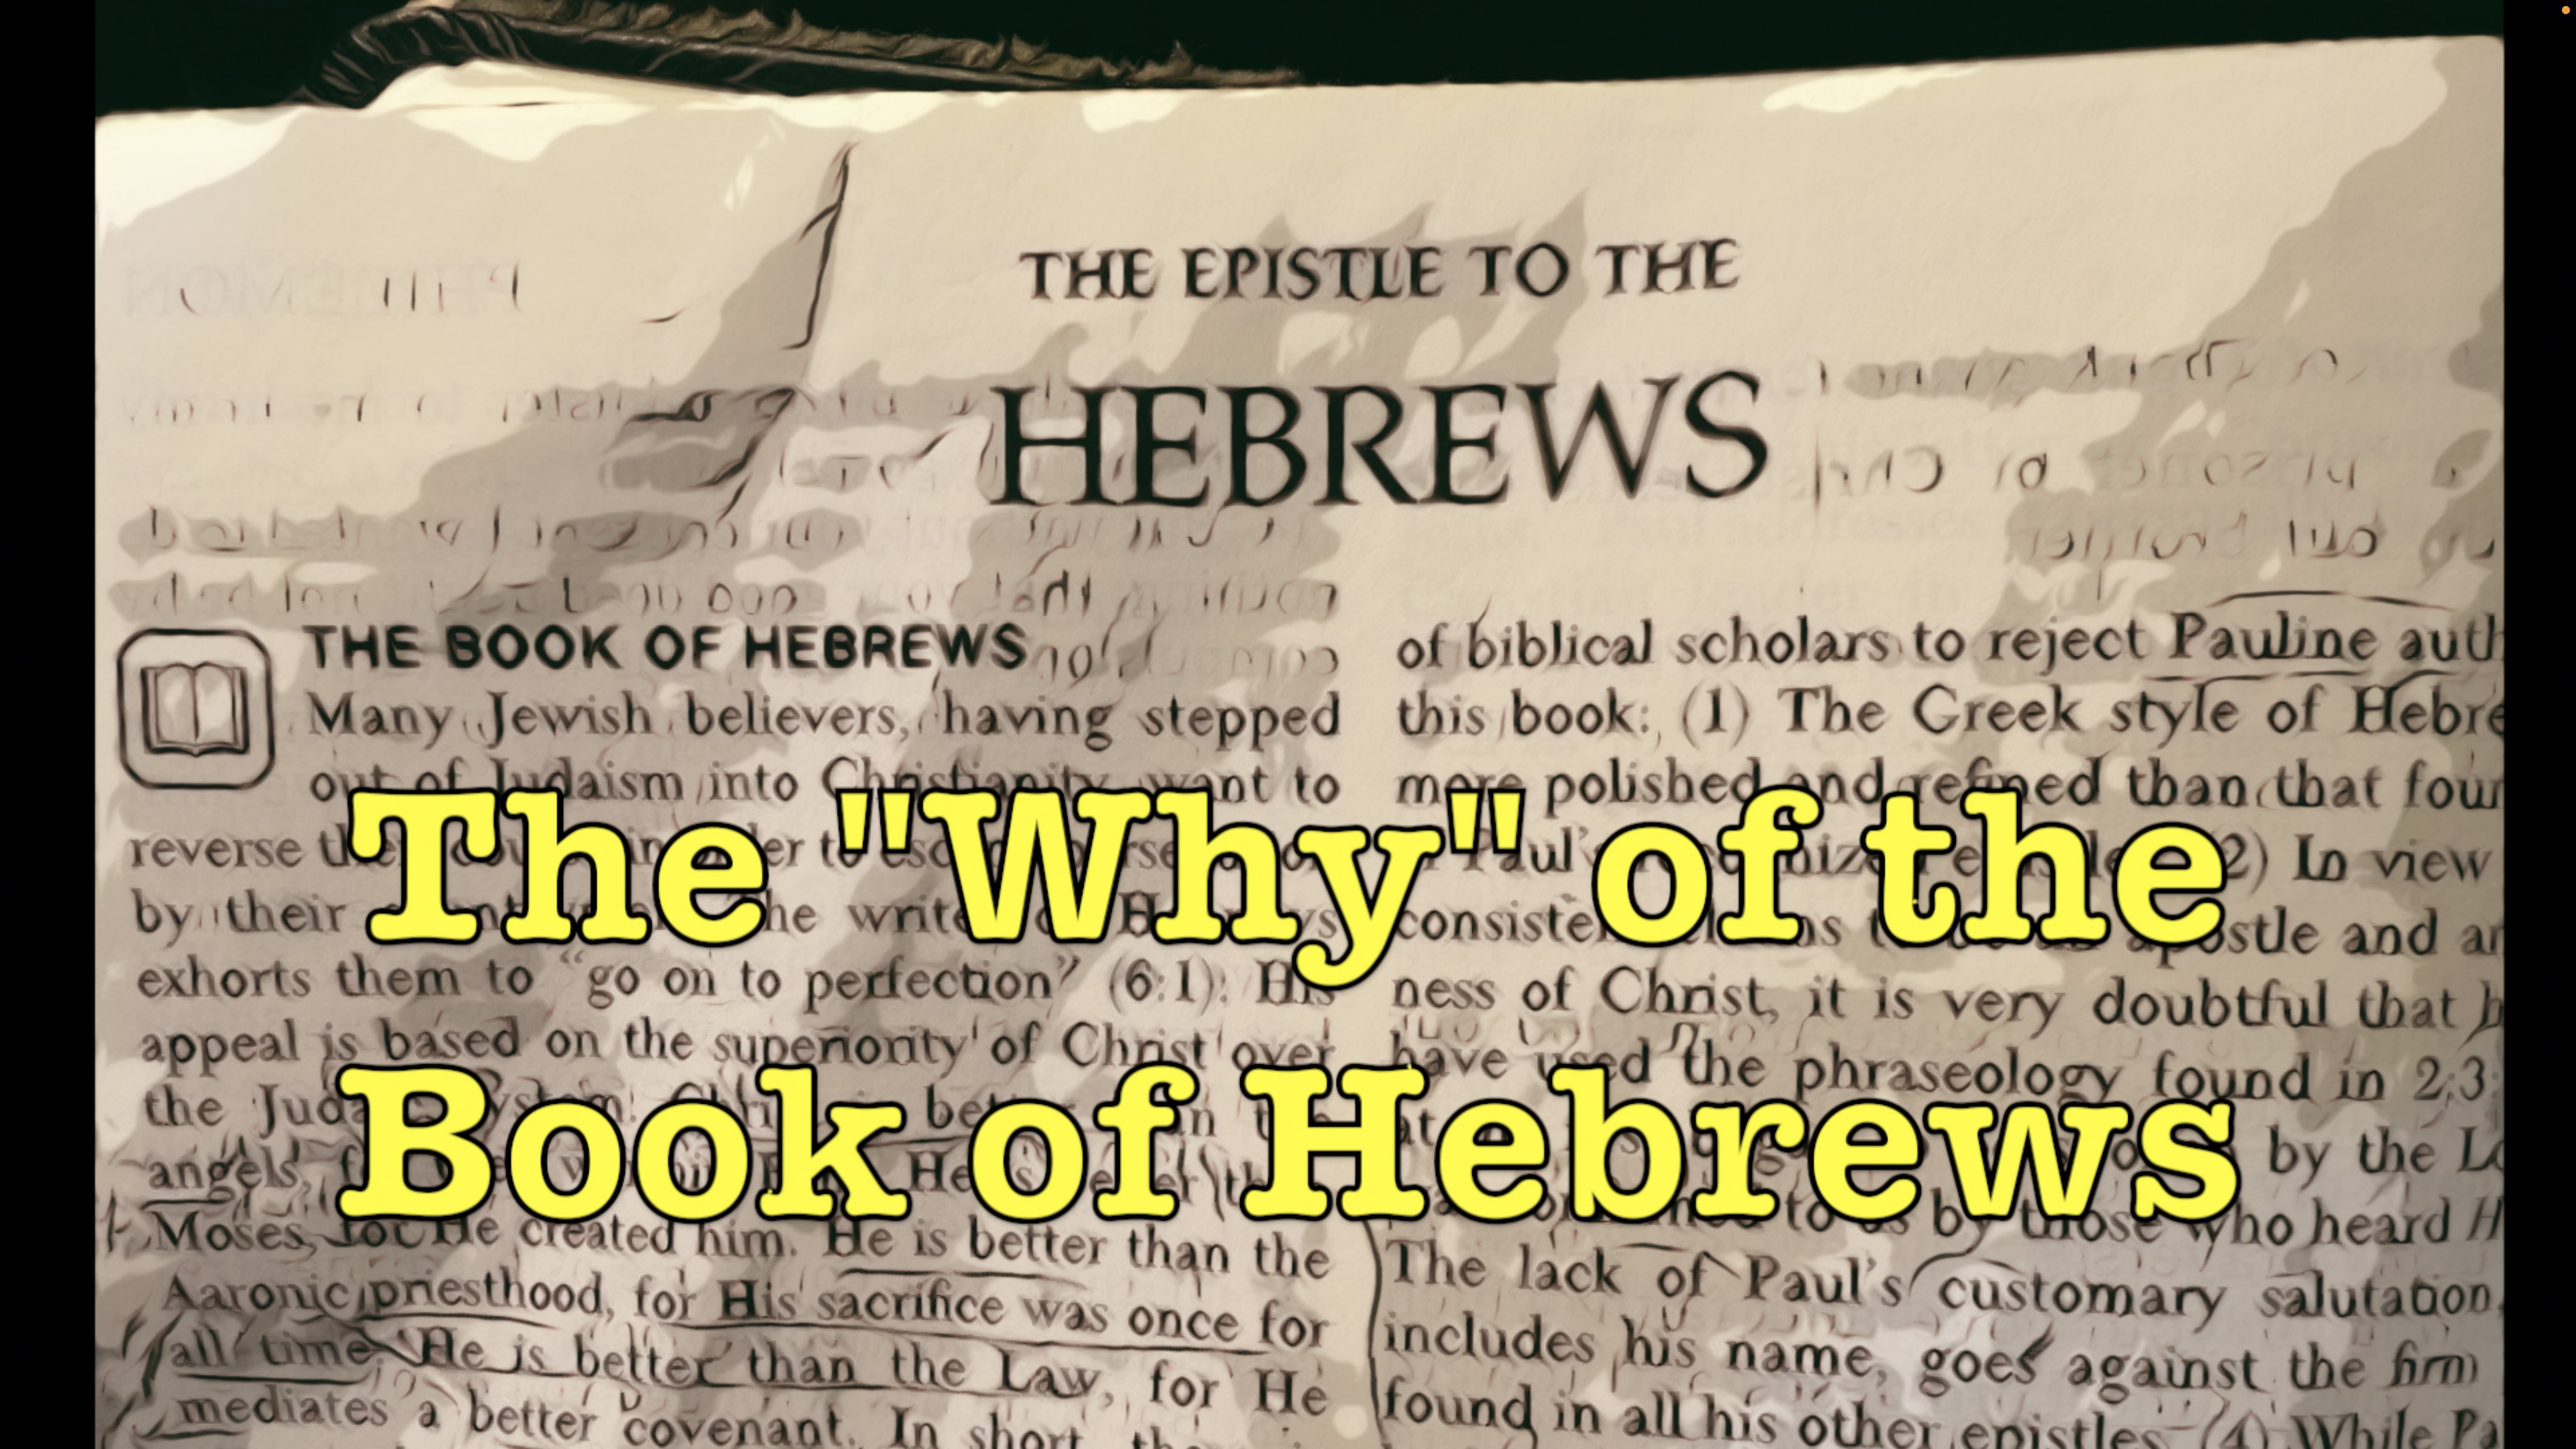 The - Why - of the Book of Hebrews